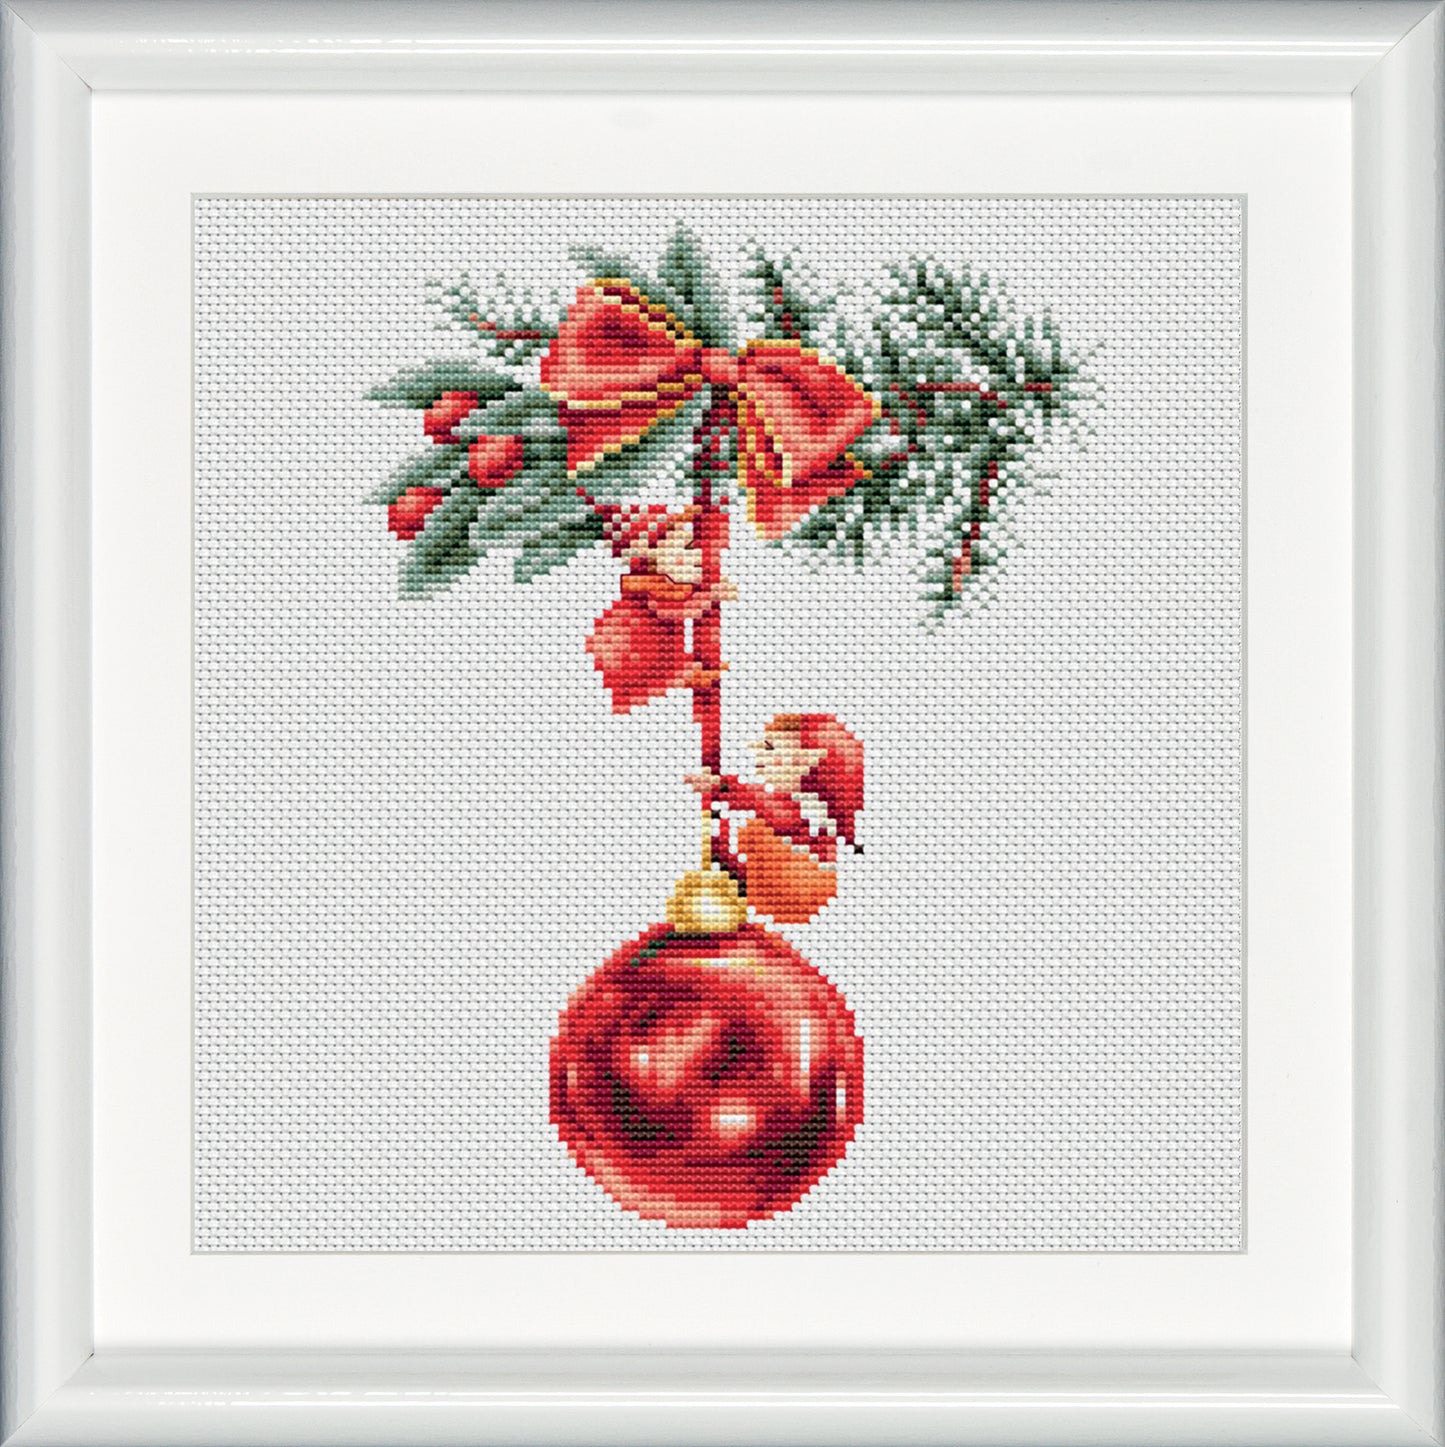 Three lovely embroidery designs of Christmas elves. This second design shows two elves hanging from a bright red christmas ornament. The colors red and green predominate in this design, which gives a true Christmas feeling! DSB cross stitch kits have easy to follow design charts and contain all items needed. 